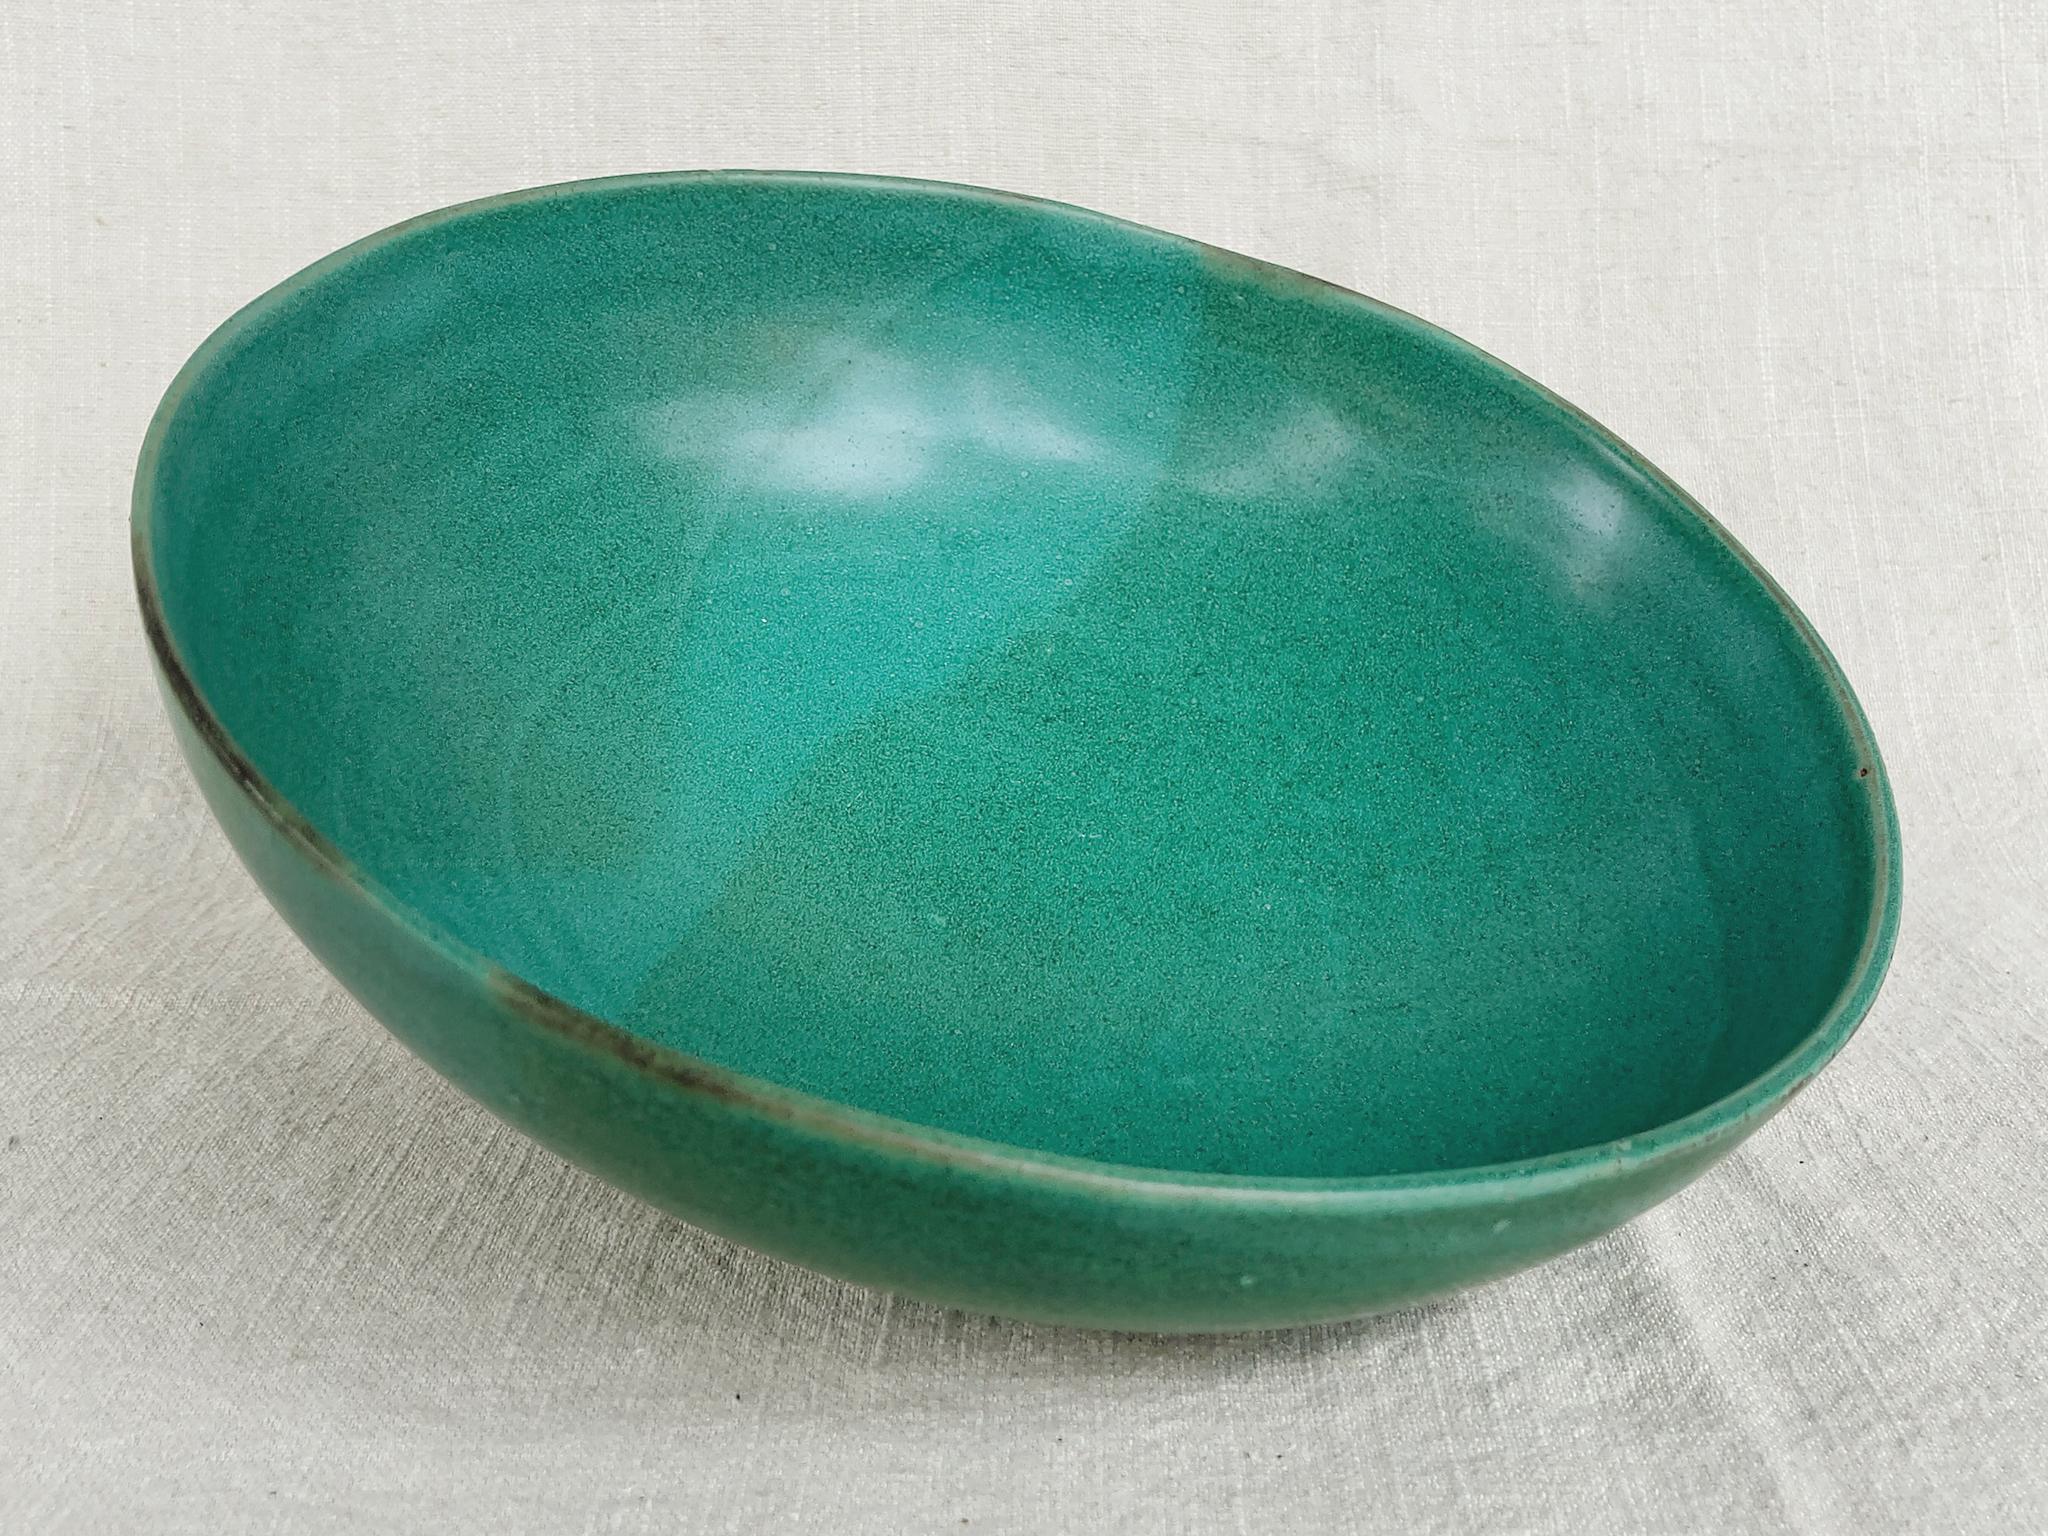 Glazed Thom Lussier Ceramic Bowl #28, from the Oxidized Copper Collection For Sale